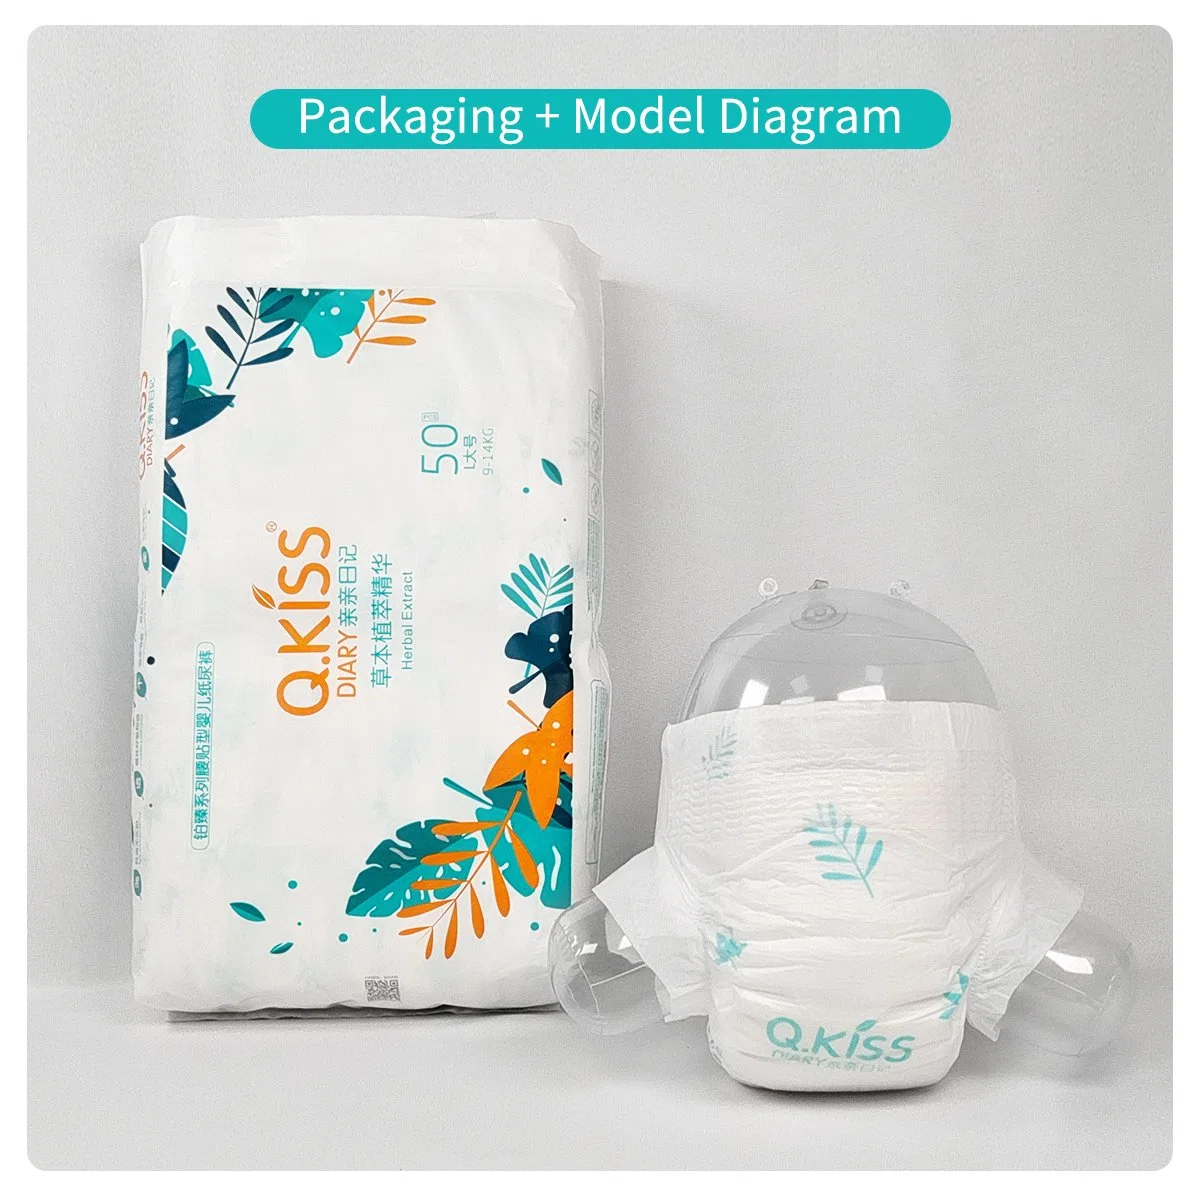 OEM/ODM Available Q. Kiss Diary Herbal Extract XXL Size Disposable Baby Nappy/Diaper